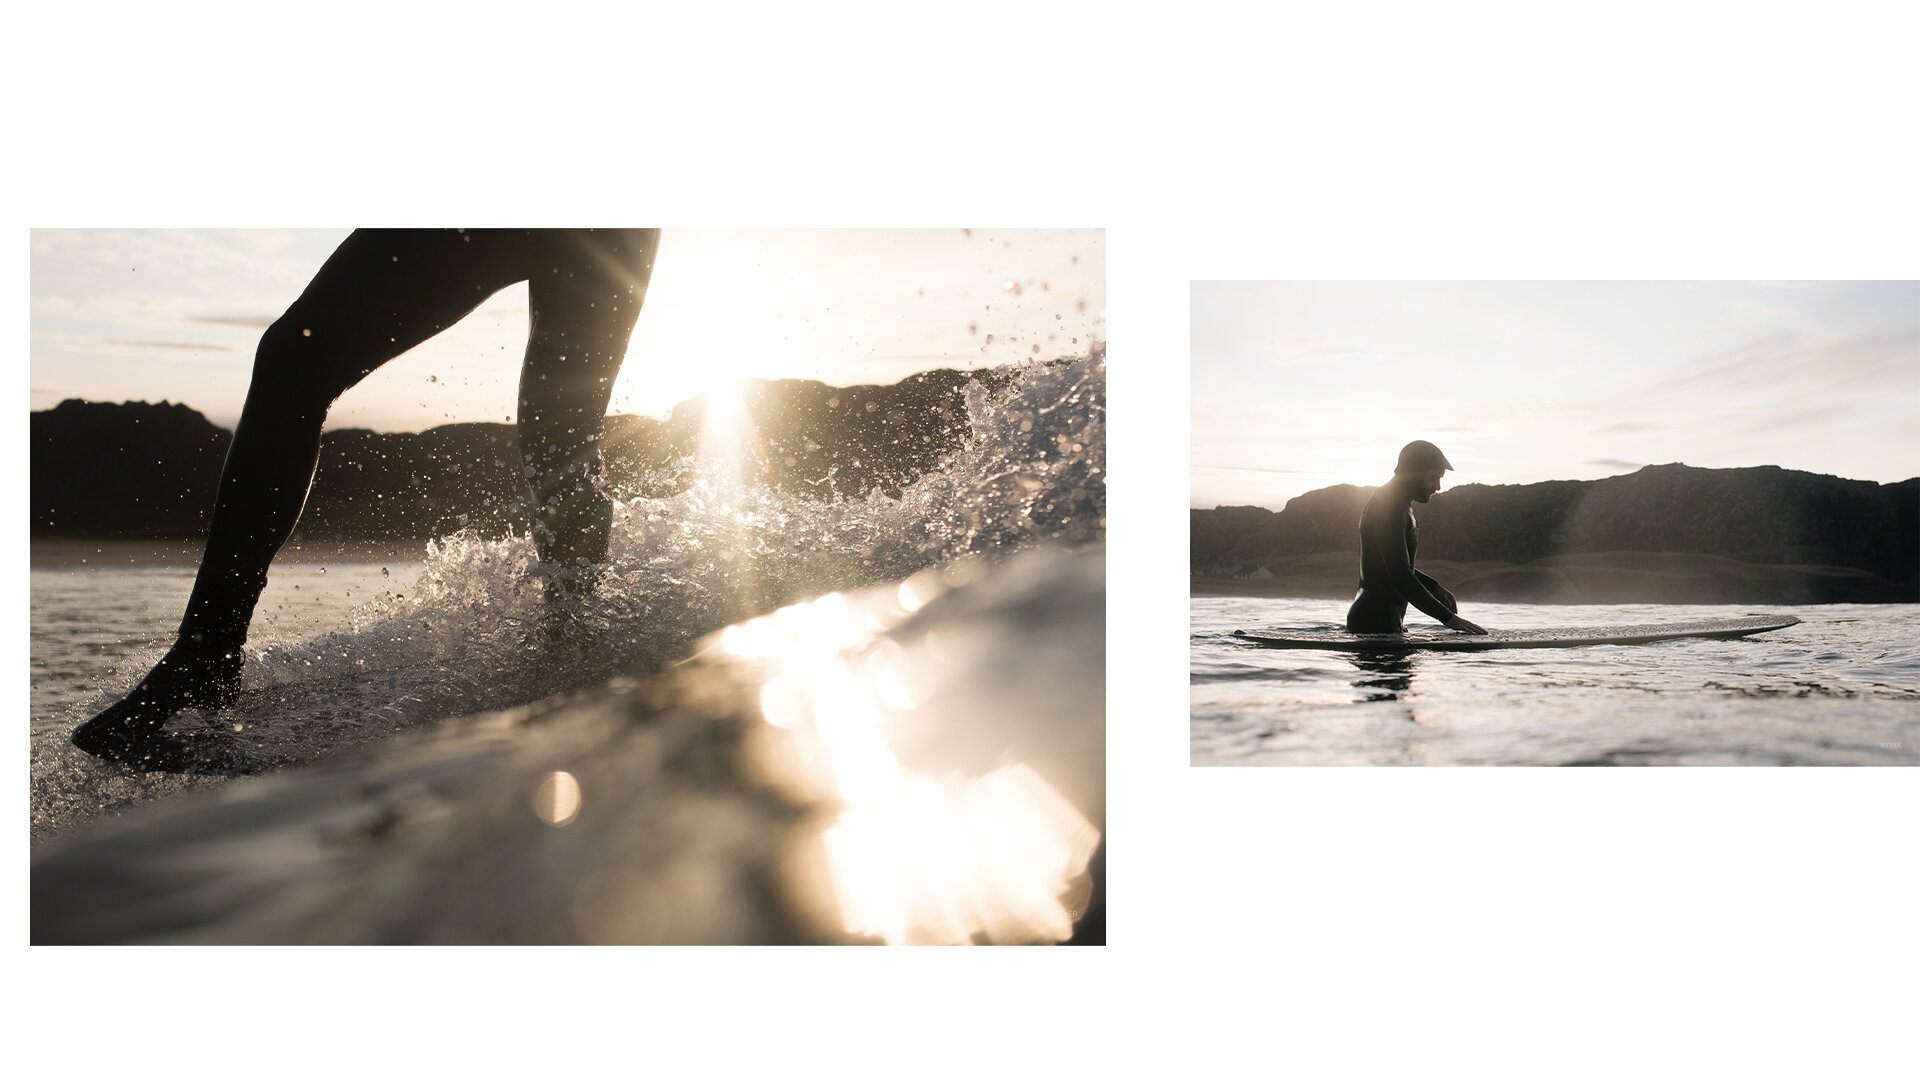 toby-butler-photographer-photography-scotland-surfing-surf-landscape-travelmikelay-mike-lay-hebrides-colinmacleod-musician-island-longboarder-photographer-ocean-north-photo-surfer-earth-climate-wild-10.jpg